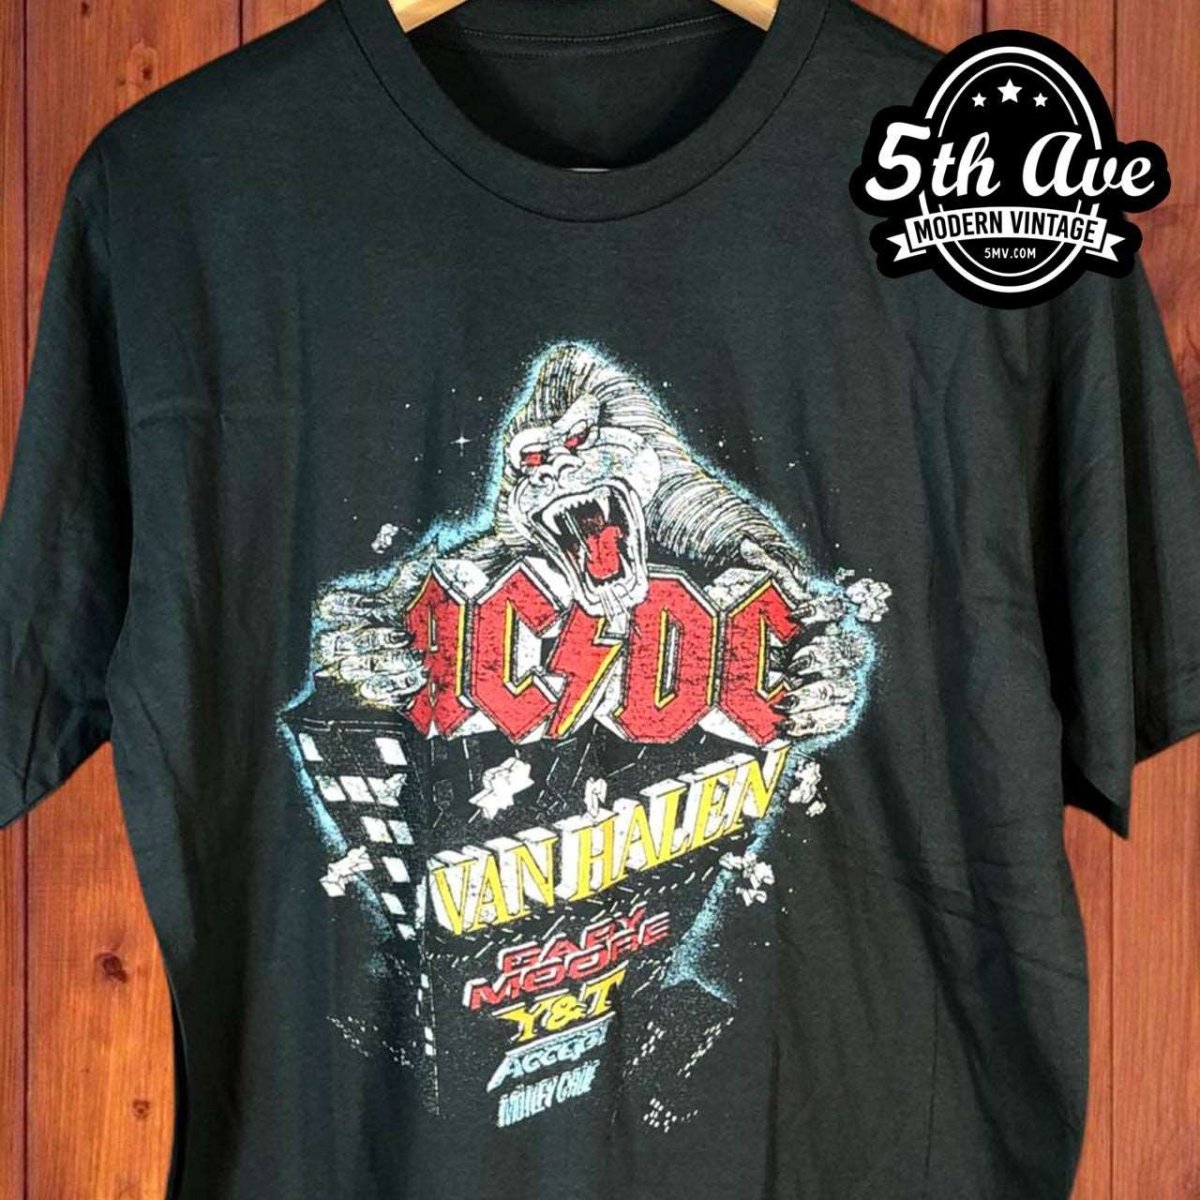 Monsters of Rock 1984 AC/DC ACDC, Van Halen, Gary Moore, Accept, Mötley Crüe, Y&T Yesterday & Today - New Vintage Band T shirt - Vintage Band Shirts